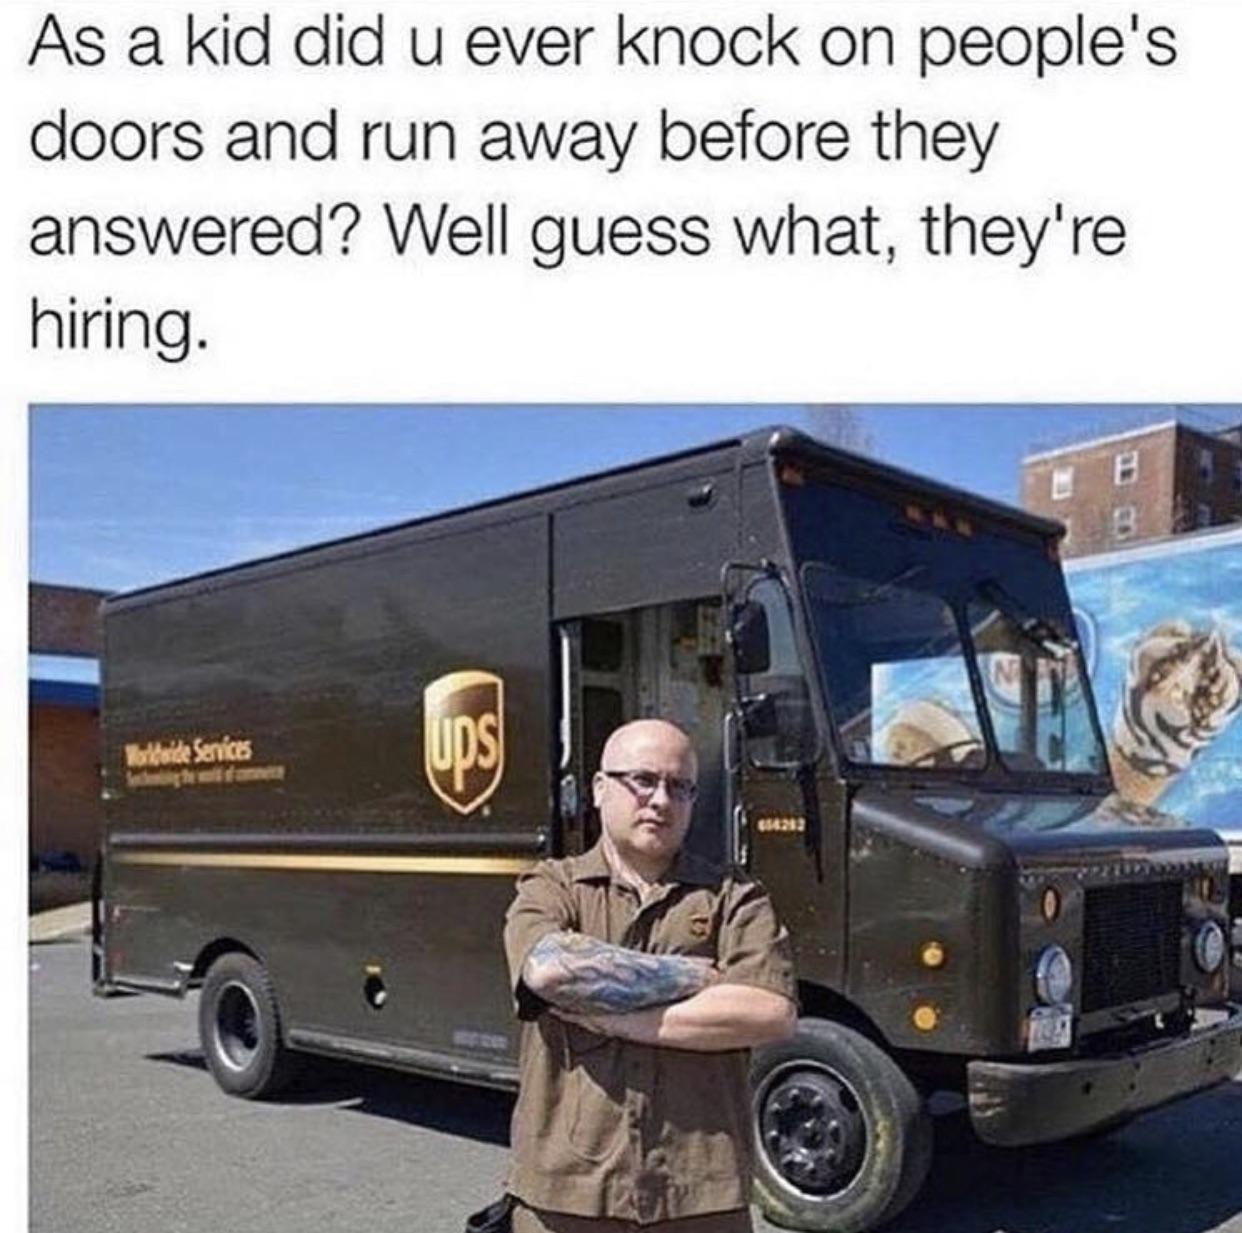 memes - ups meme - As a kid did u ever knock on people's doors and run away before they answered? Well guess what, they're hiring.